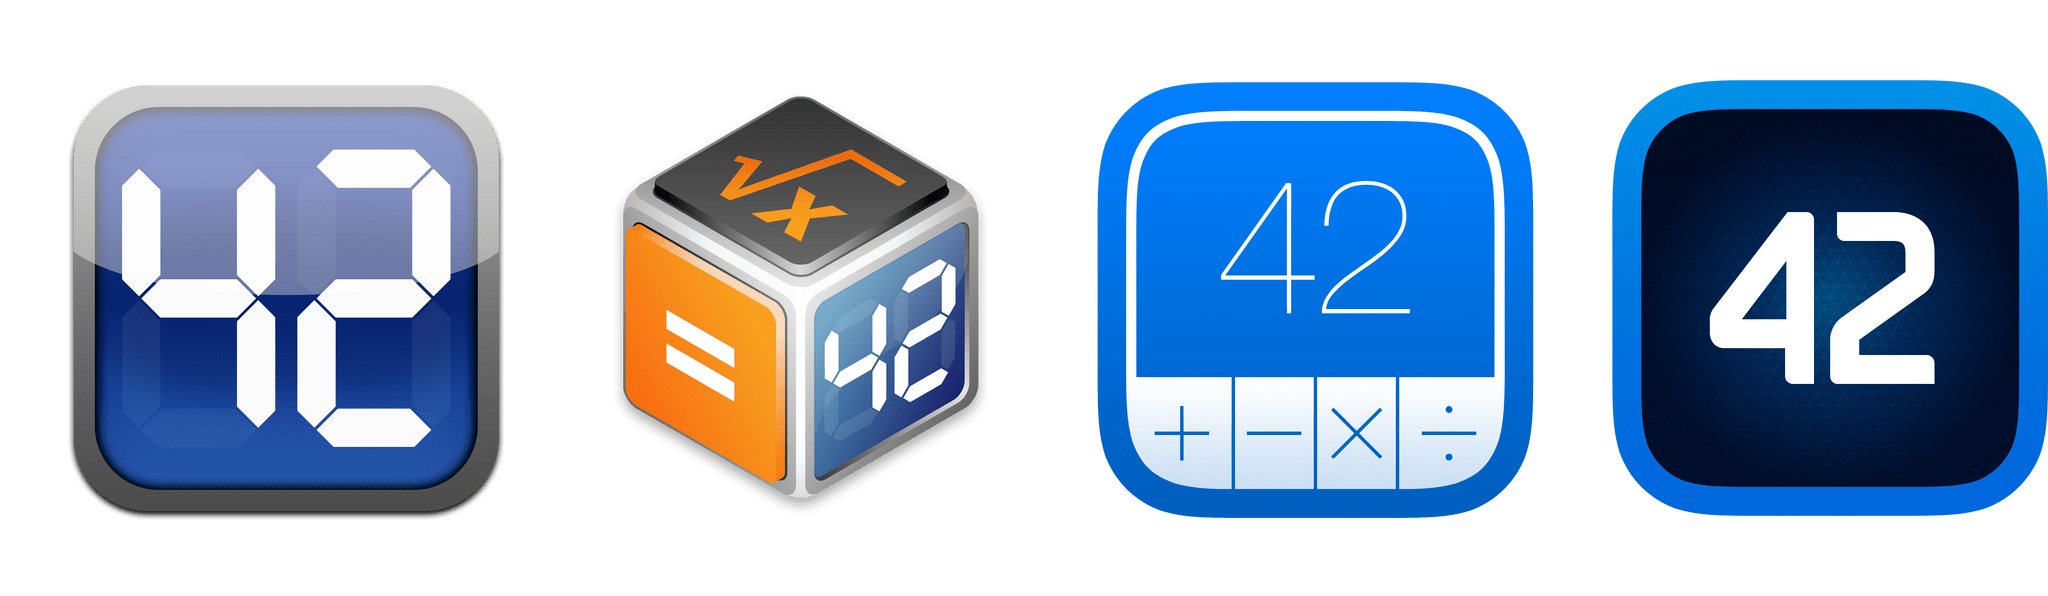 A selection of PCalc icons. Left to right: iOS from 2008, OS X from 2012, iOS from 2013, and iOS and macOS from 2021.